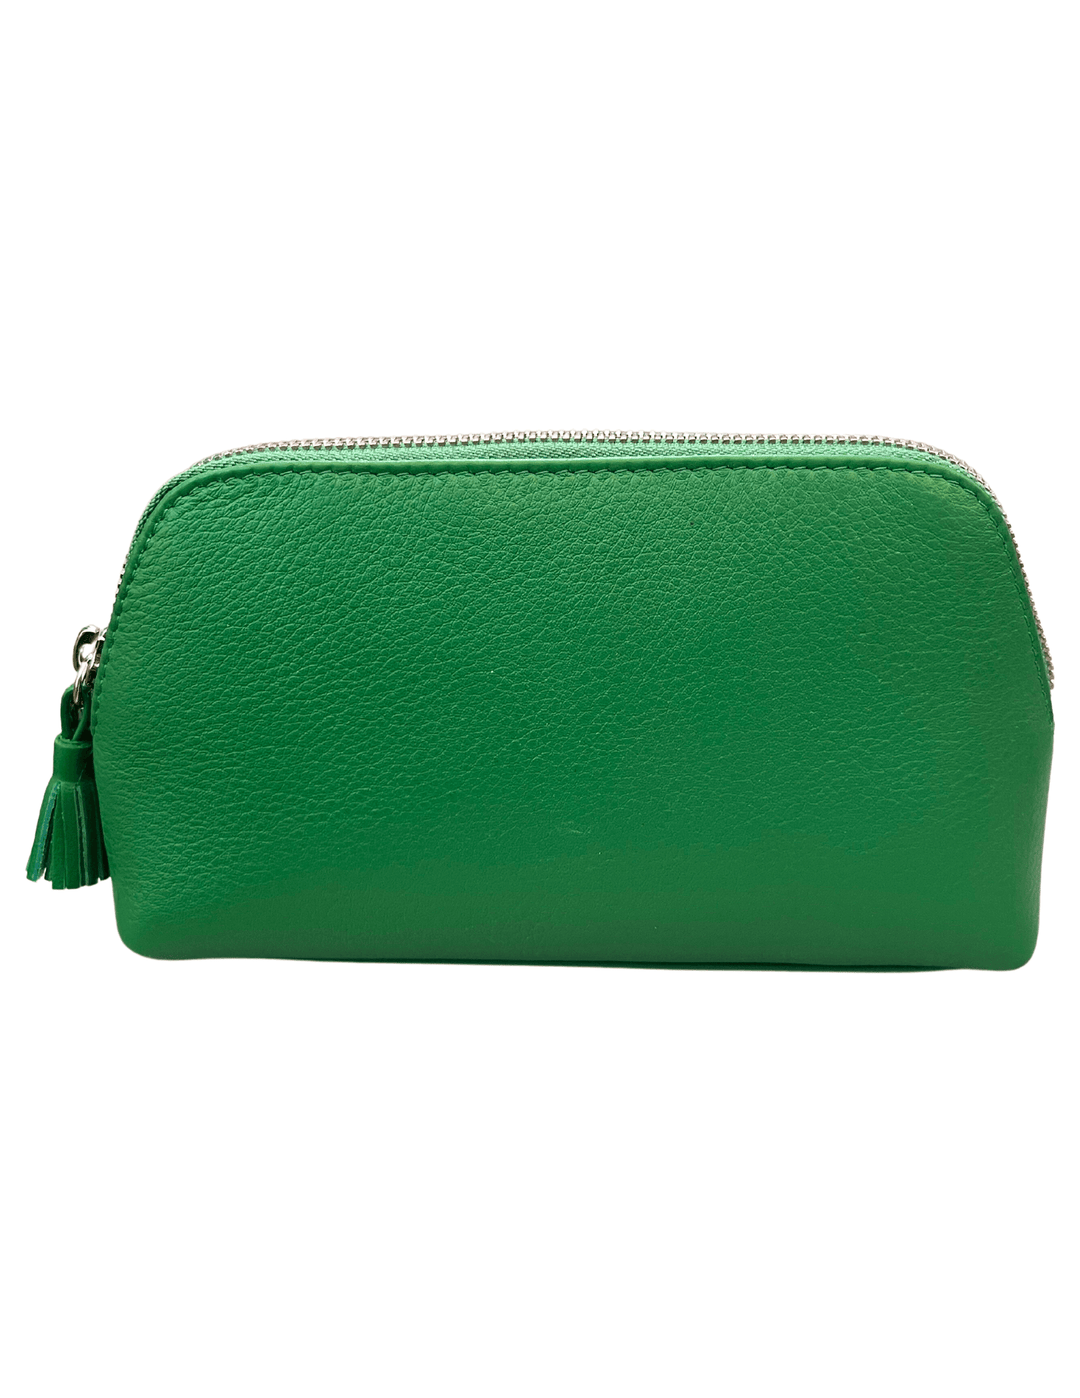 Emerald green leather large makeup pouch rfid blocking gift boutique near me